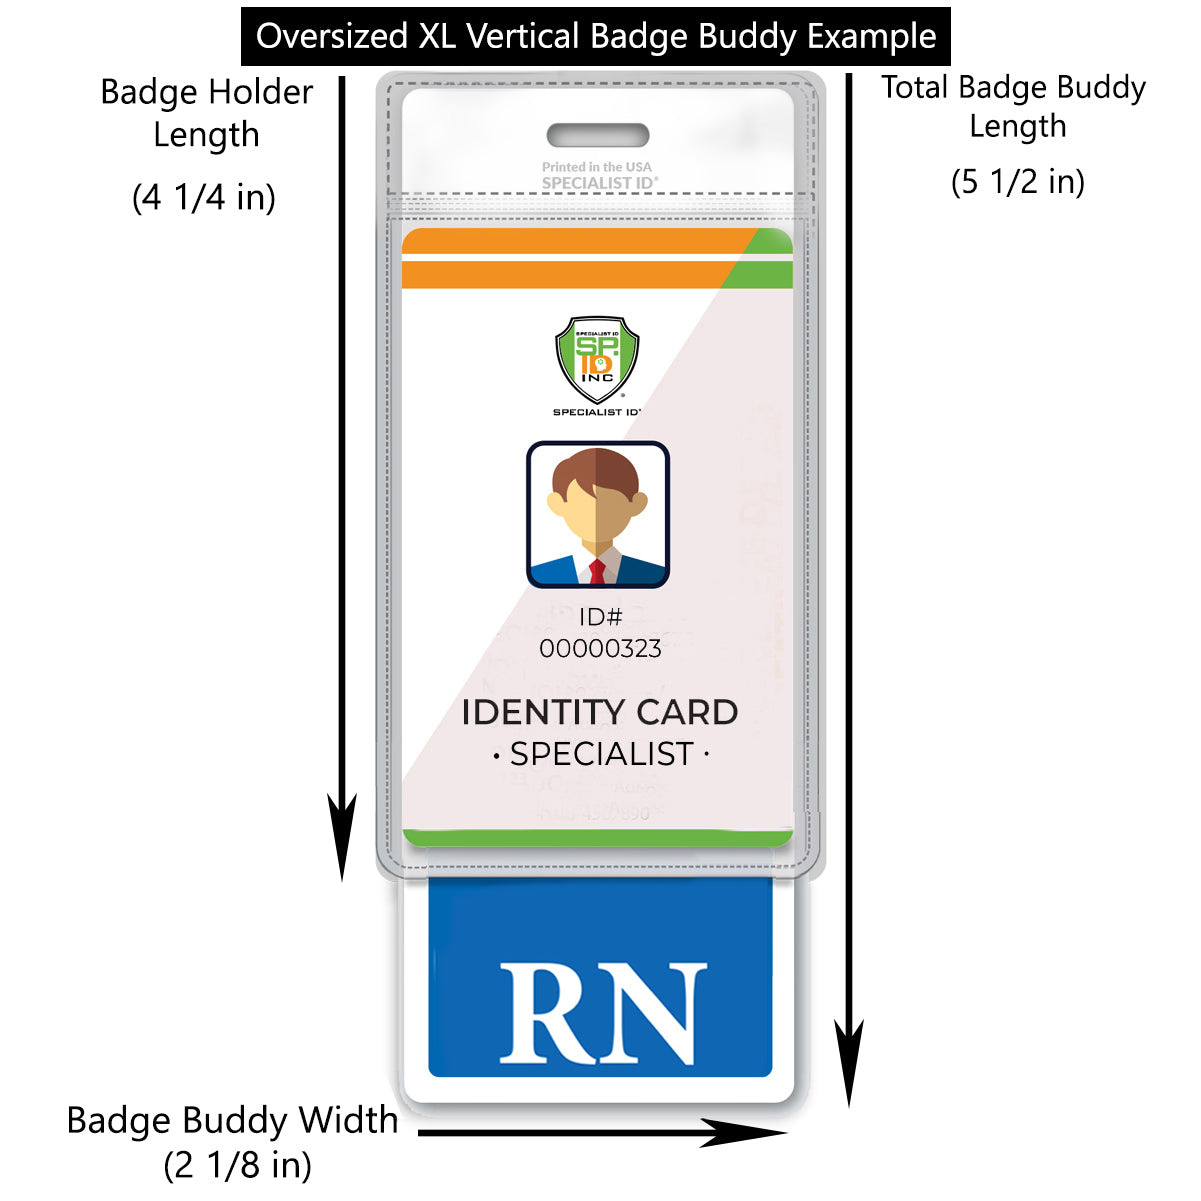 Oversized RN Badge Buddy and More Badge Buddies at